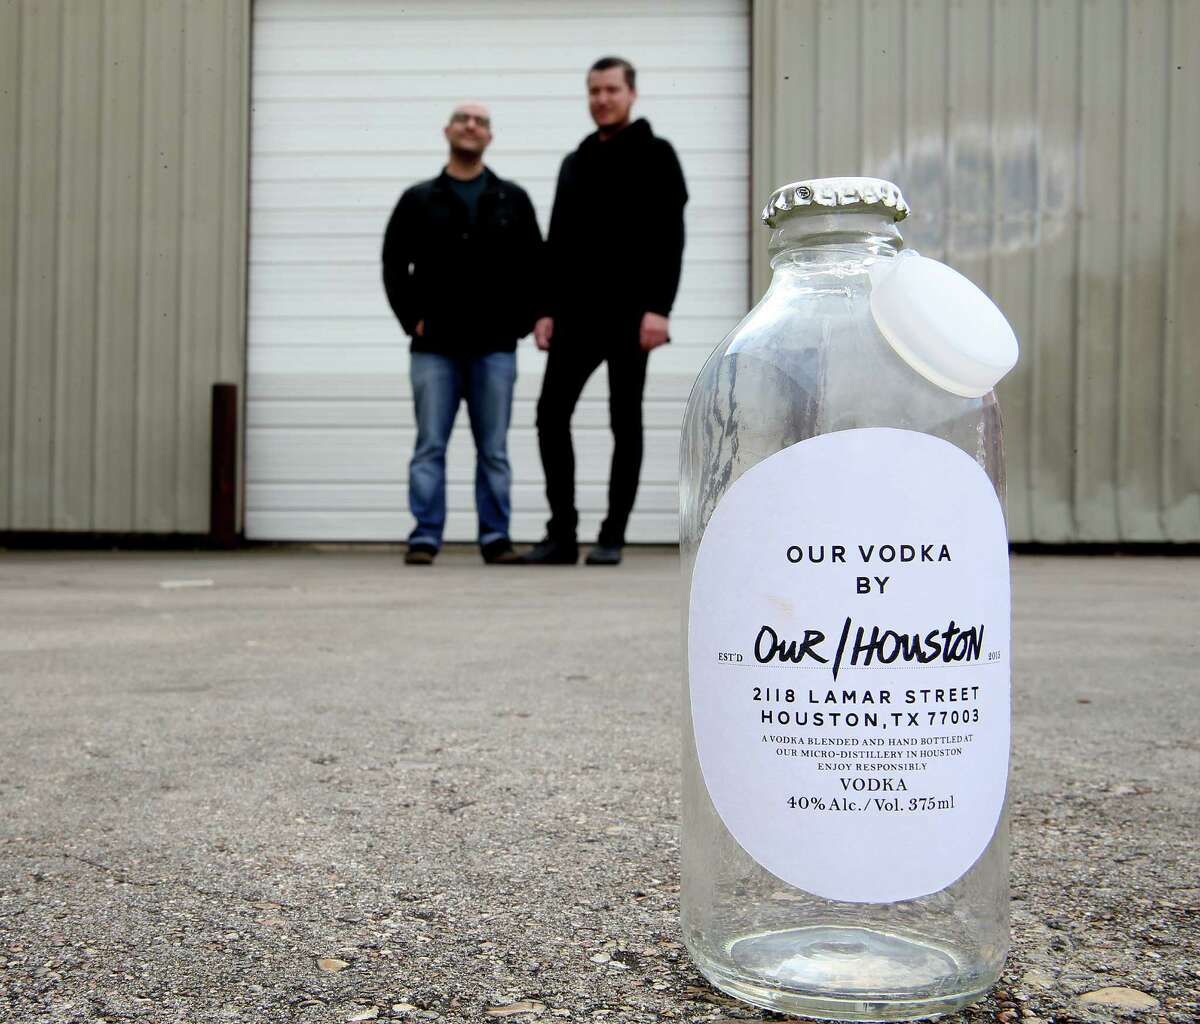 Omar Afra, left, and Dutch Small stand at the future location of Our/Vodka in Houston on Thursday, Jan. 7, 2016.